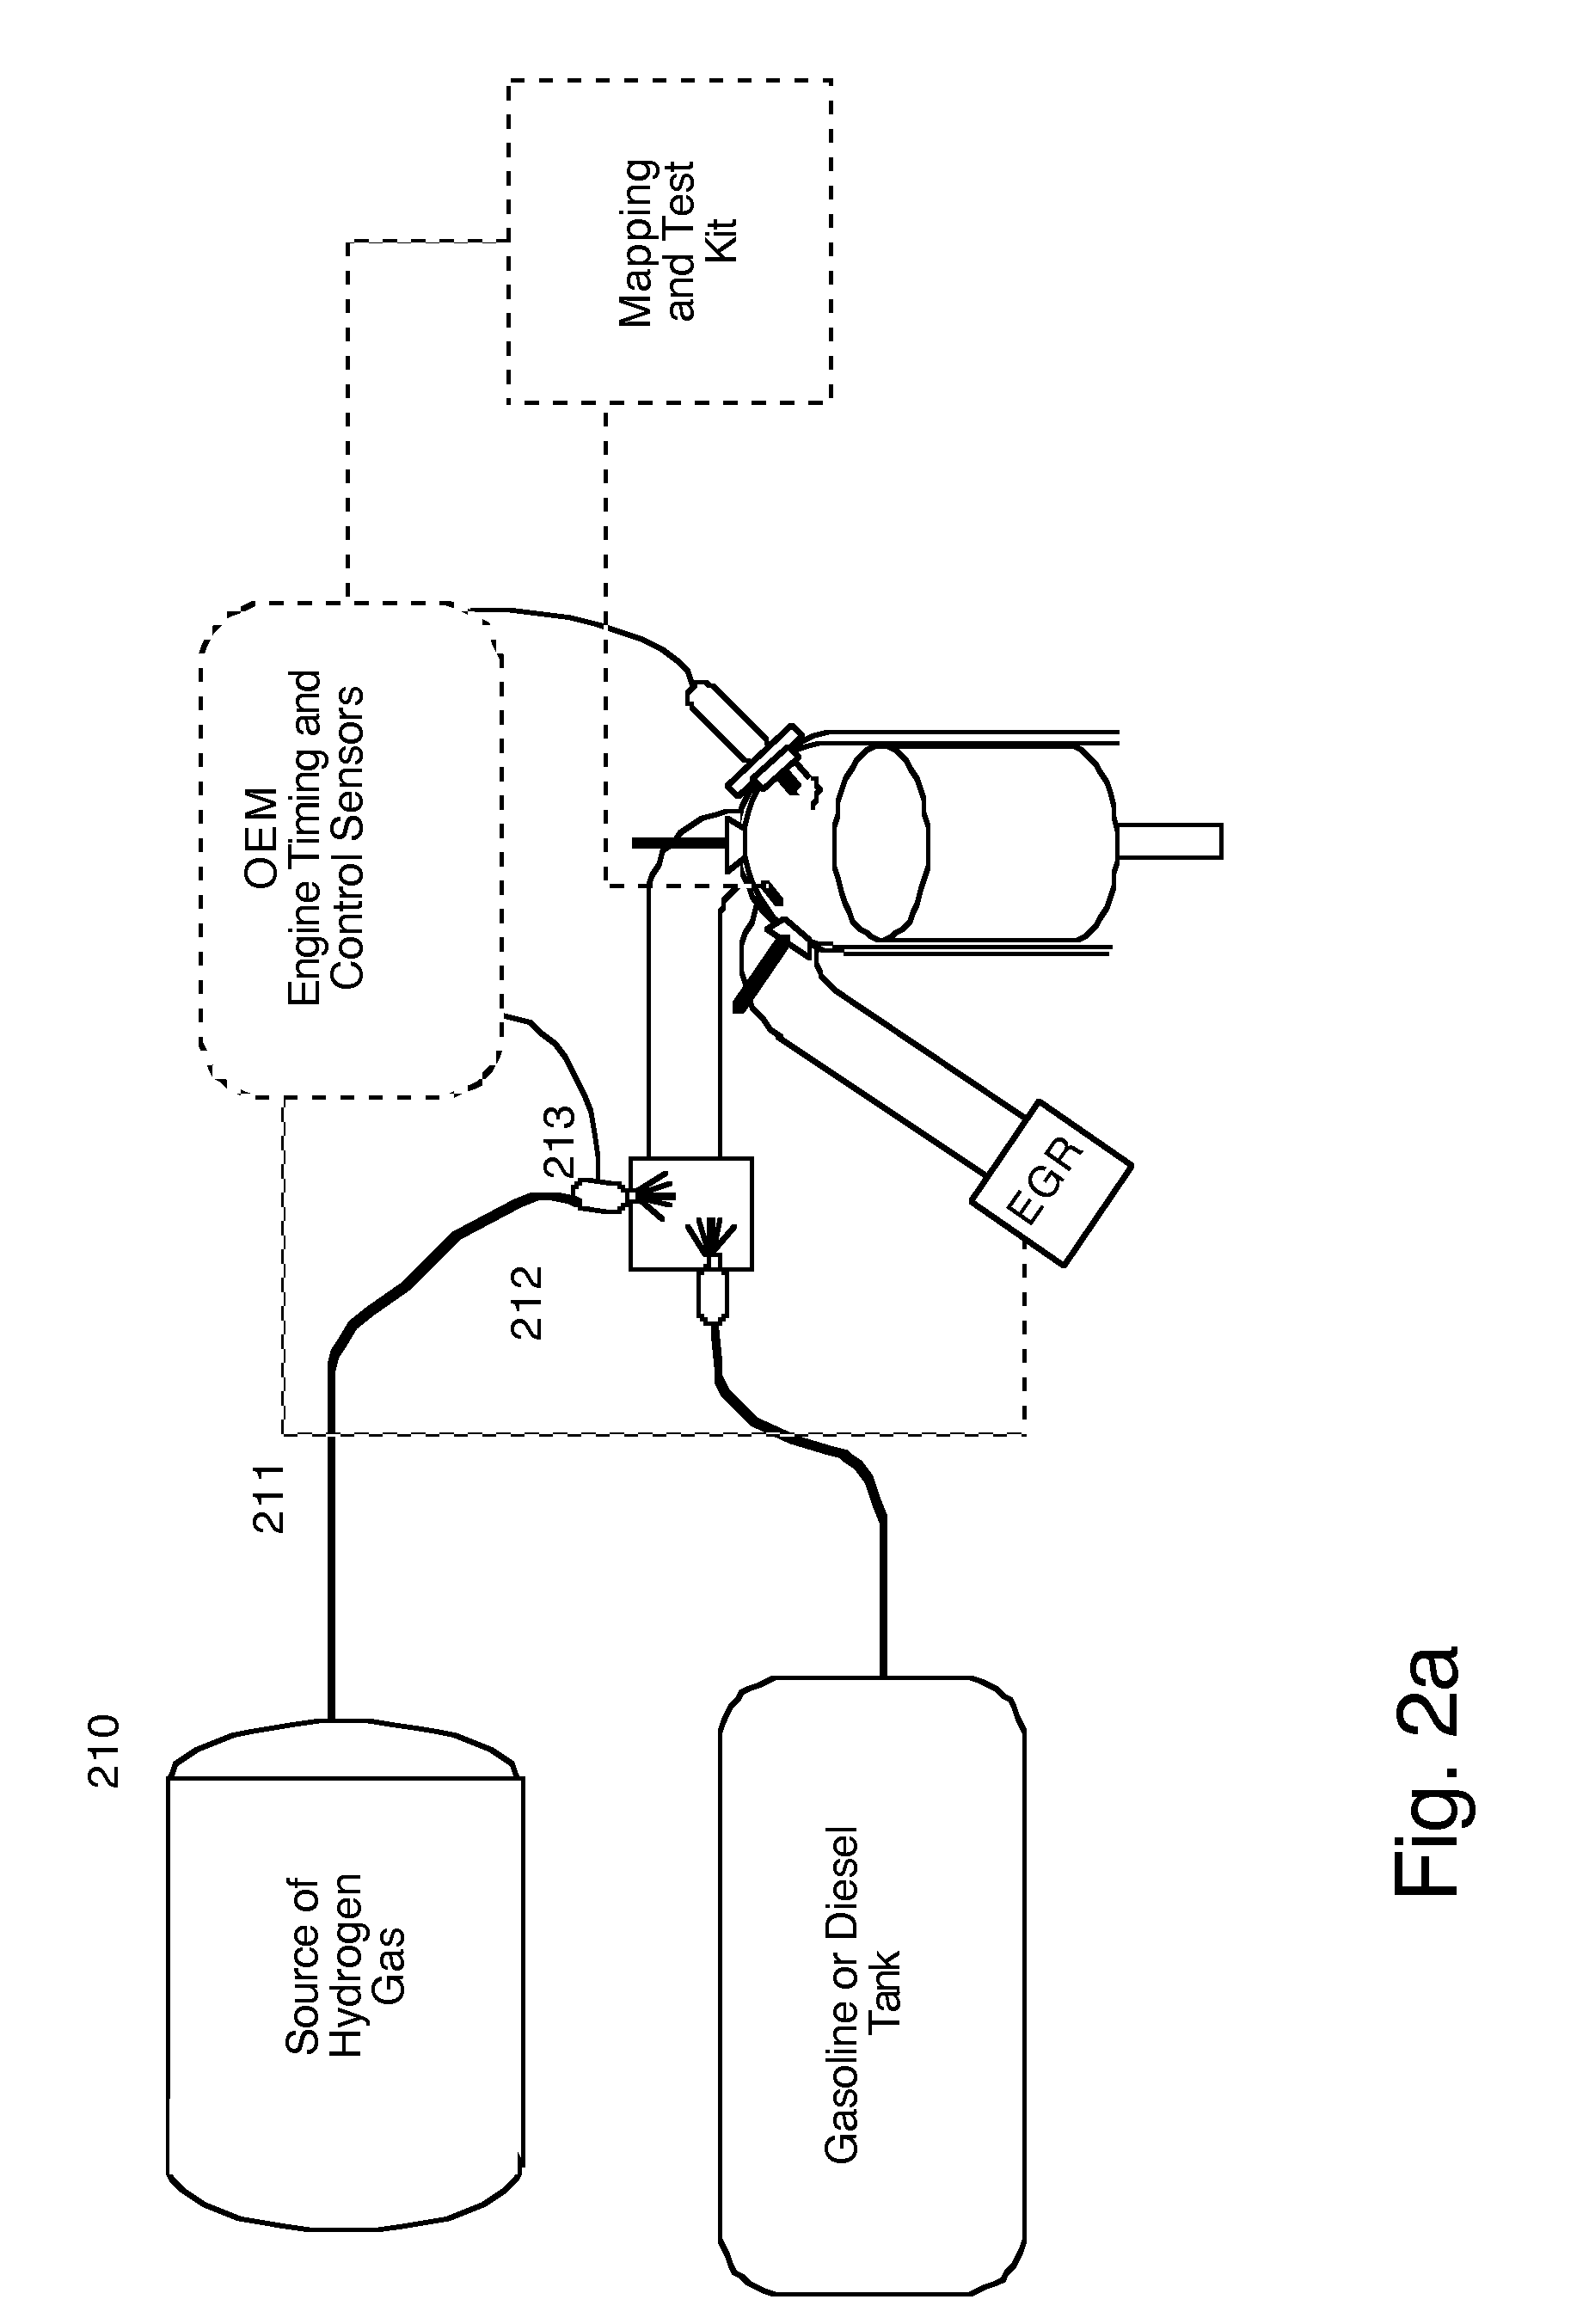 System and method for determining and brokering fuel emission offsets